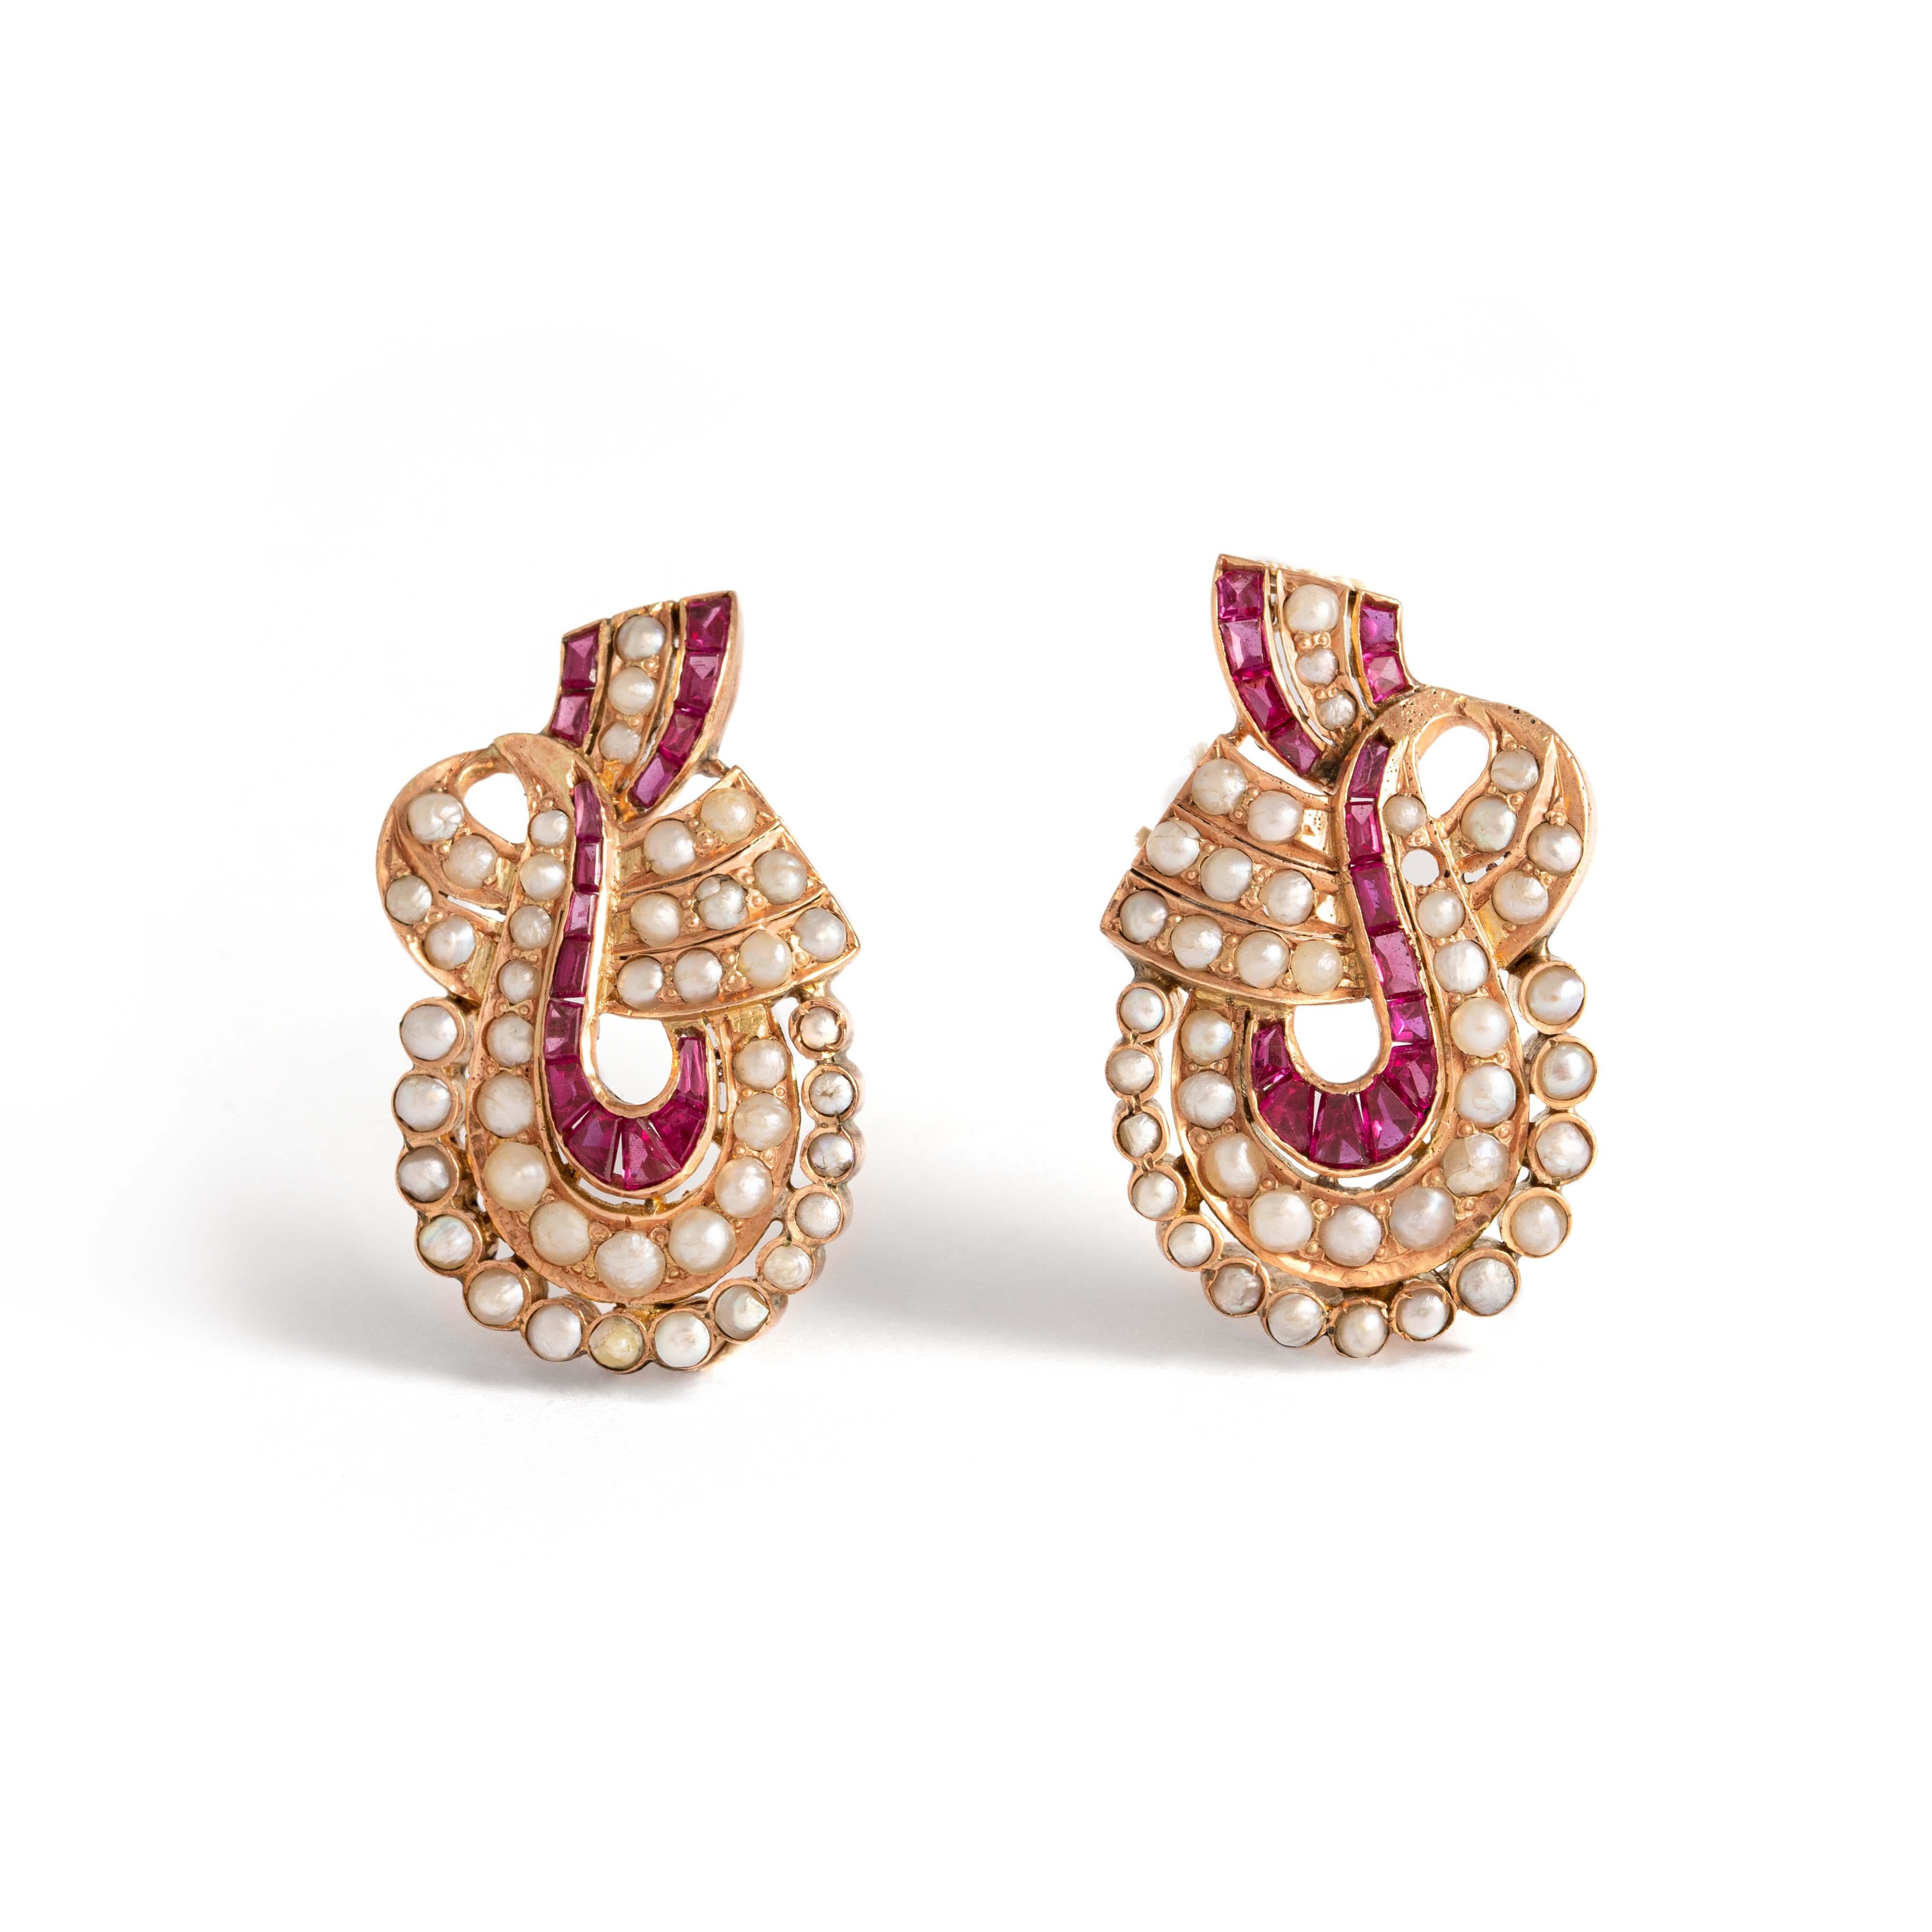 Pair of 14K yellow gold designs set with cultured pearls and calibrated red stones.
Traces of soldering, oxidation, missing and chipped. 
Dimensions: 3.50 centimeters x 2.20 centimeters. 
Gross weight: 14.92 grams.